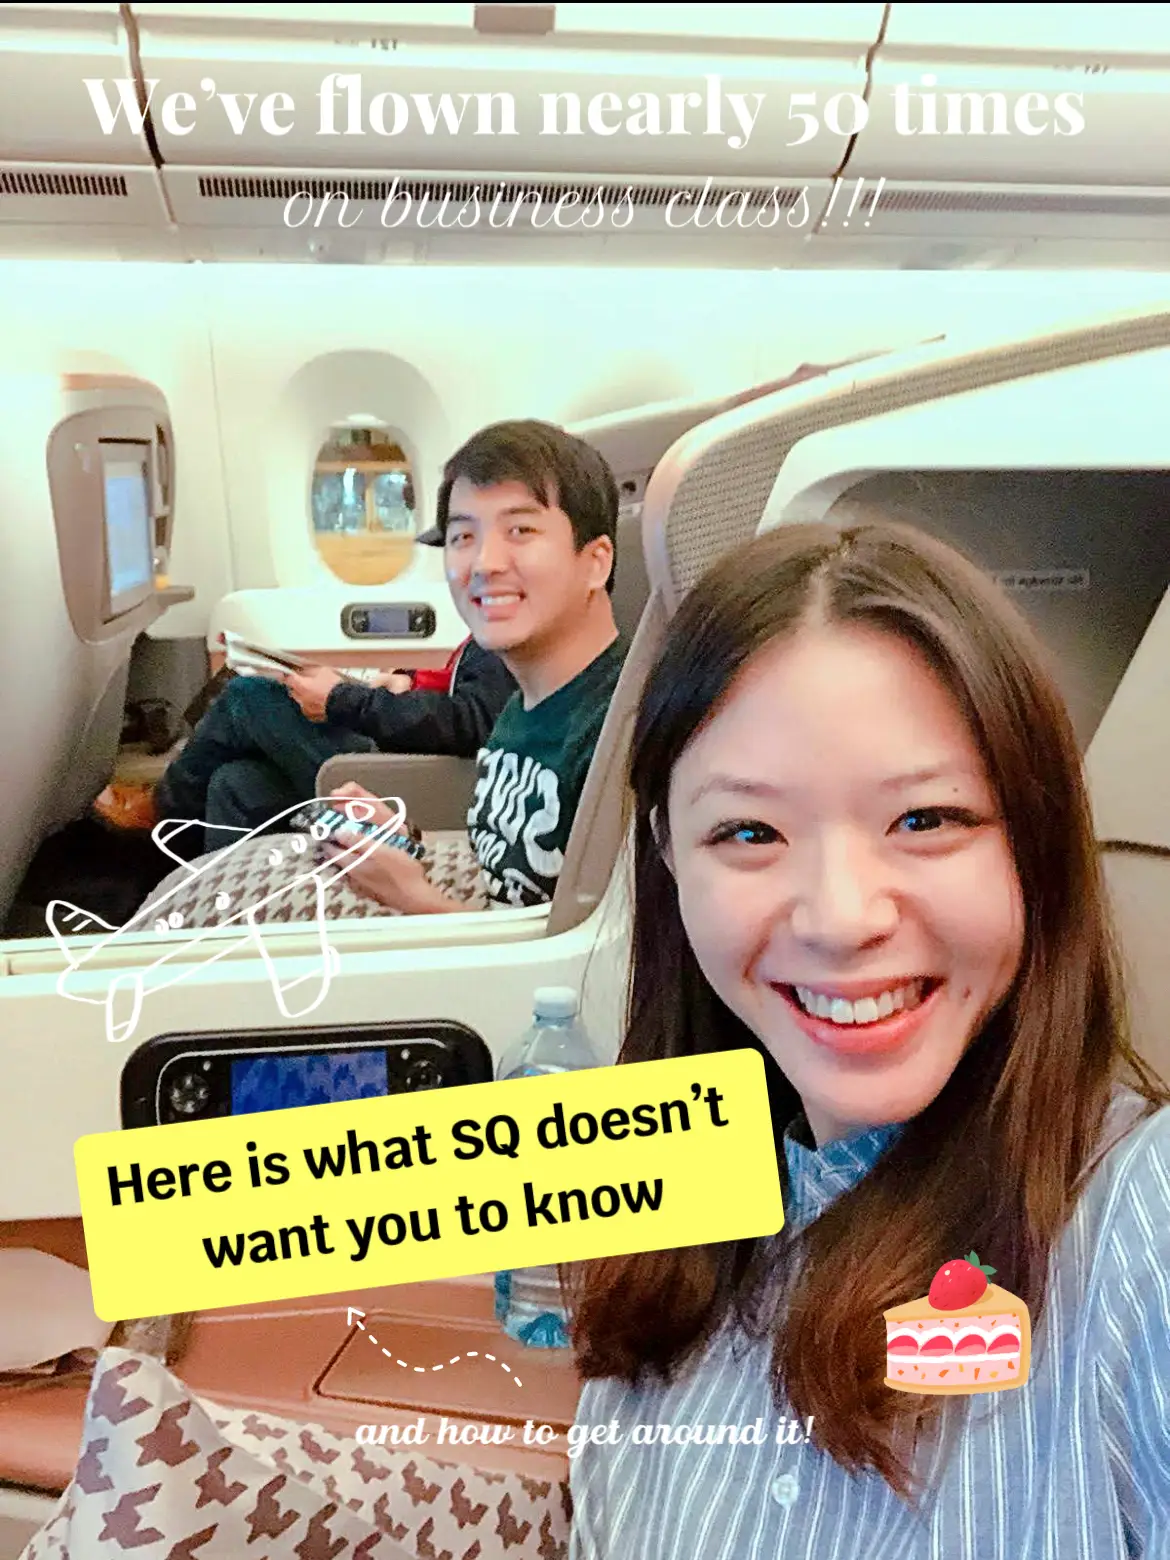 We’ve flown nearly 50 times on business class! 😱✈️🌍's images(0)